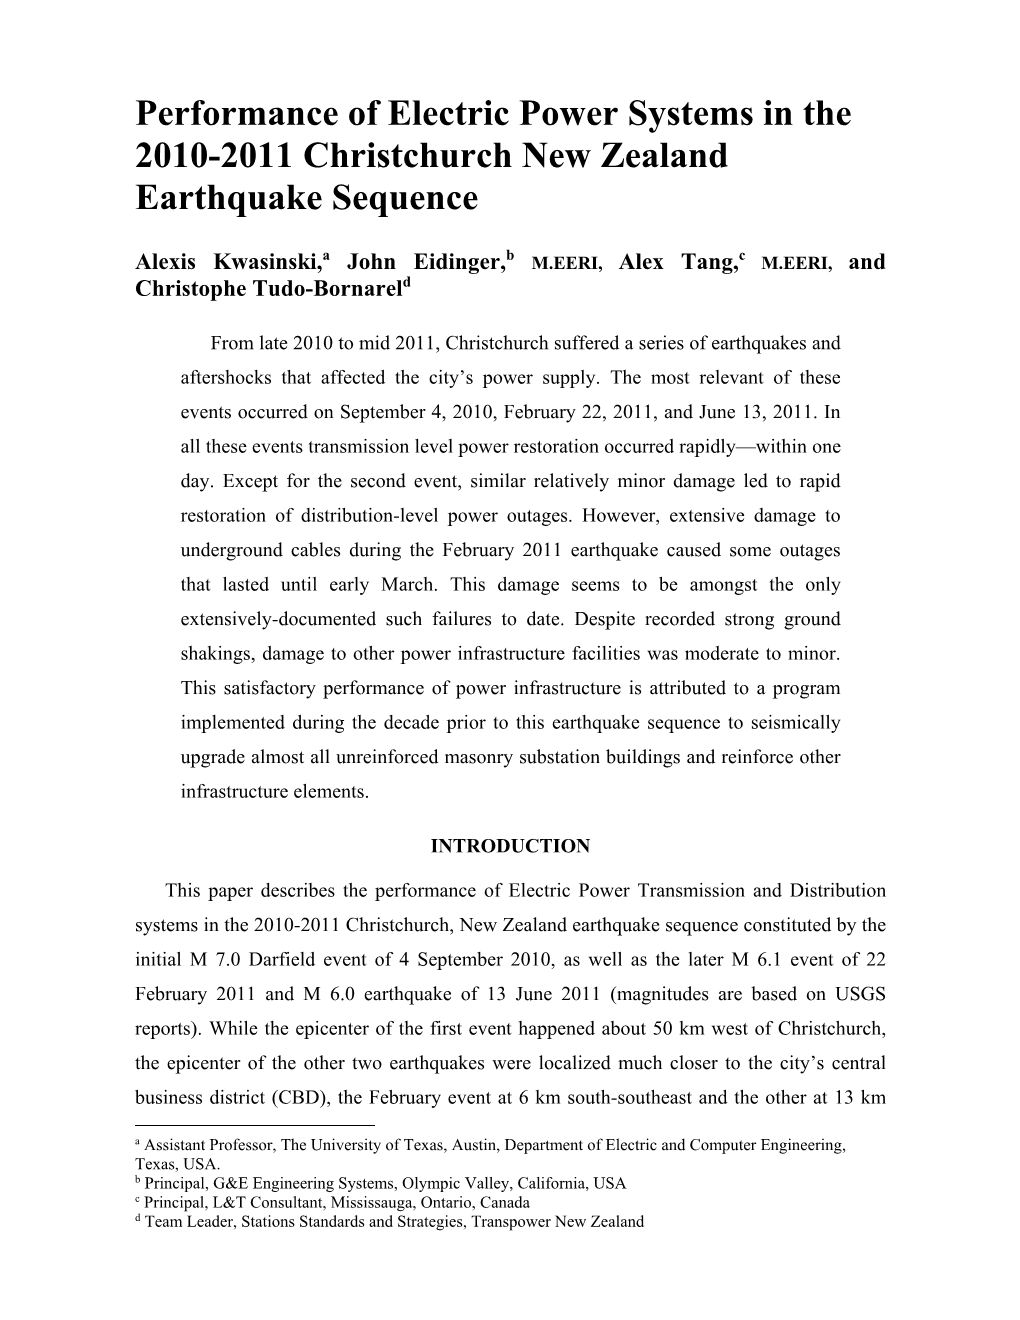 Performance of Electric Power Systems in the 2010-2011 Christchurch New Zealand Earthquake Sequence